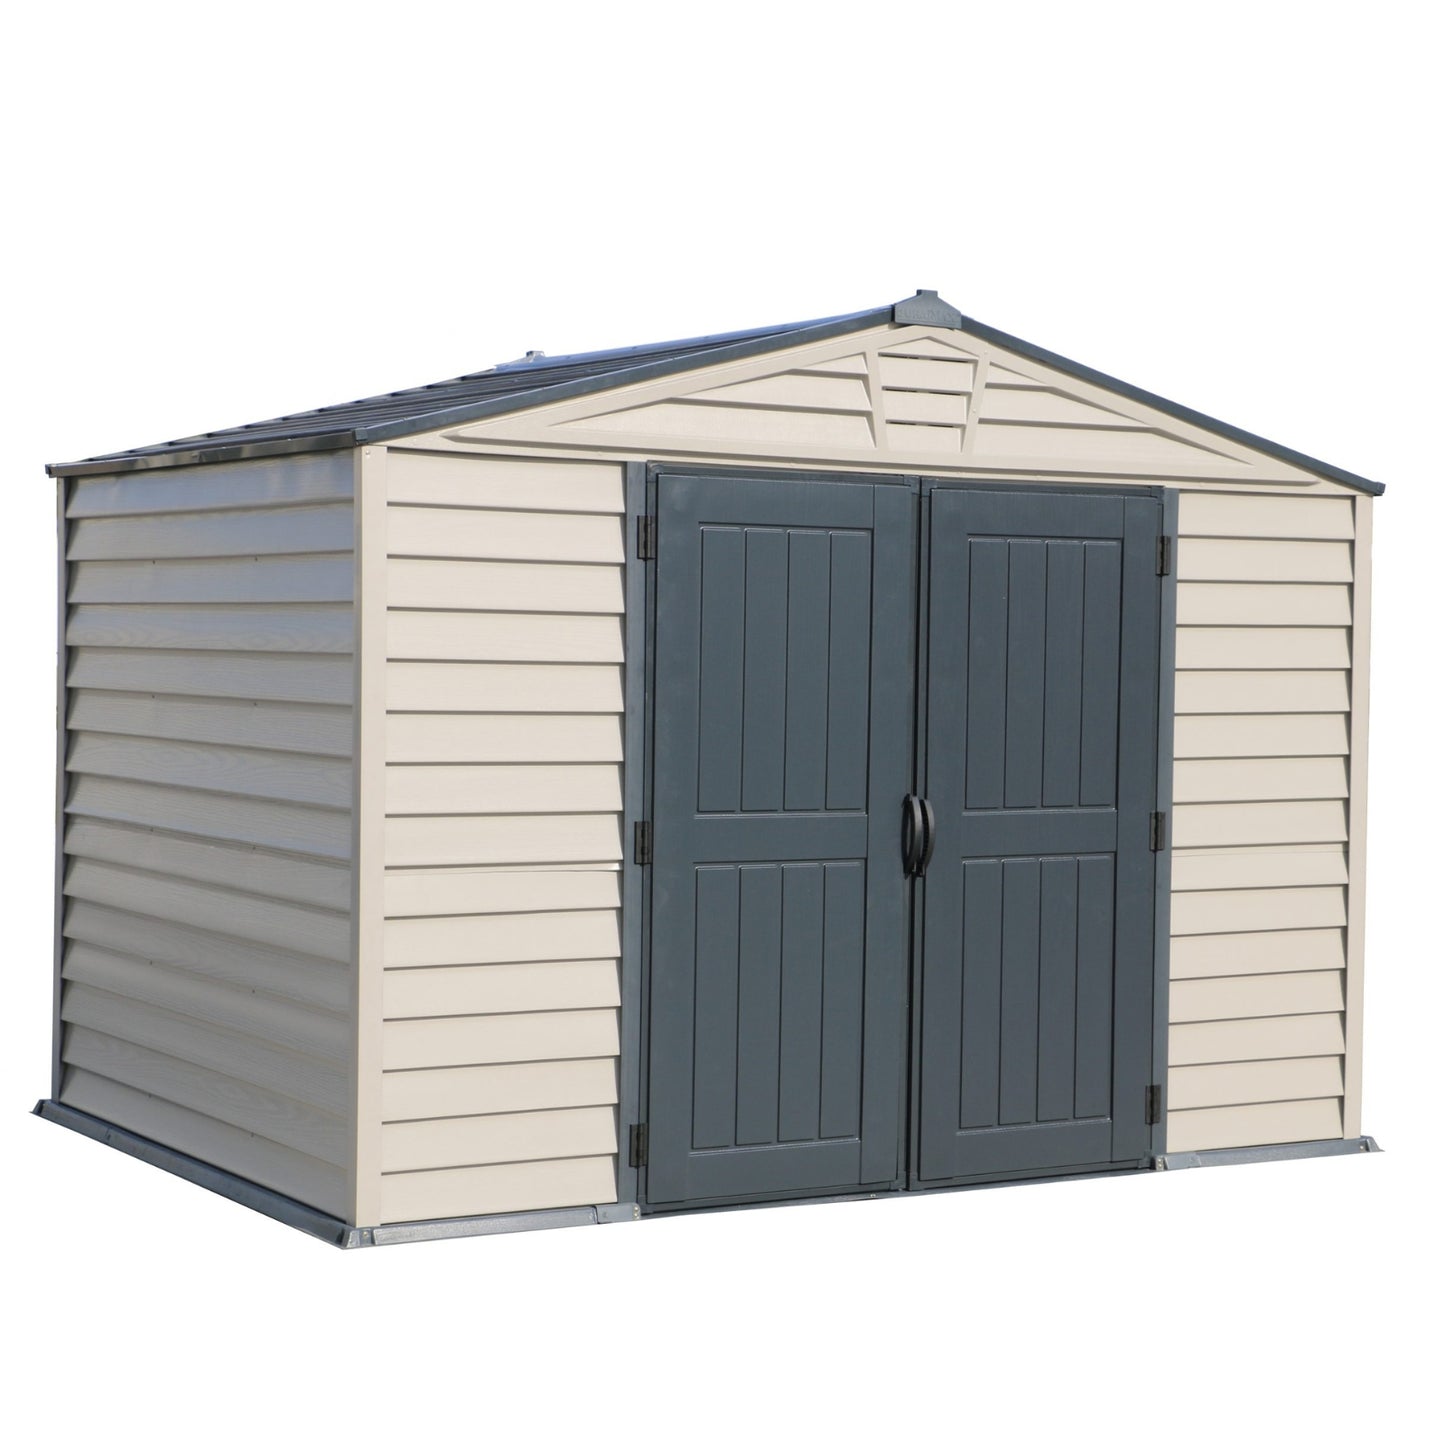 Duramax 10.5×8 ft Vinyl Shed With Molded Floor